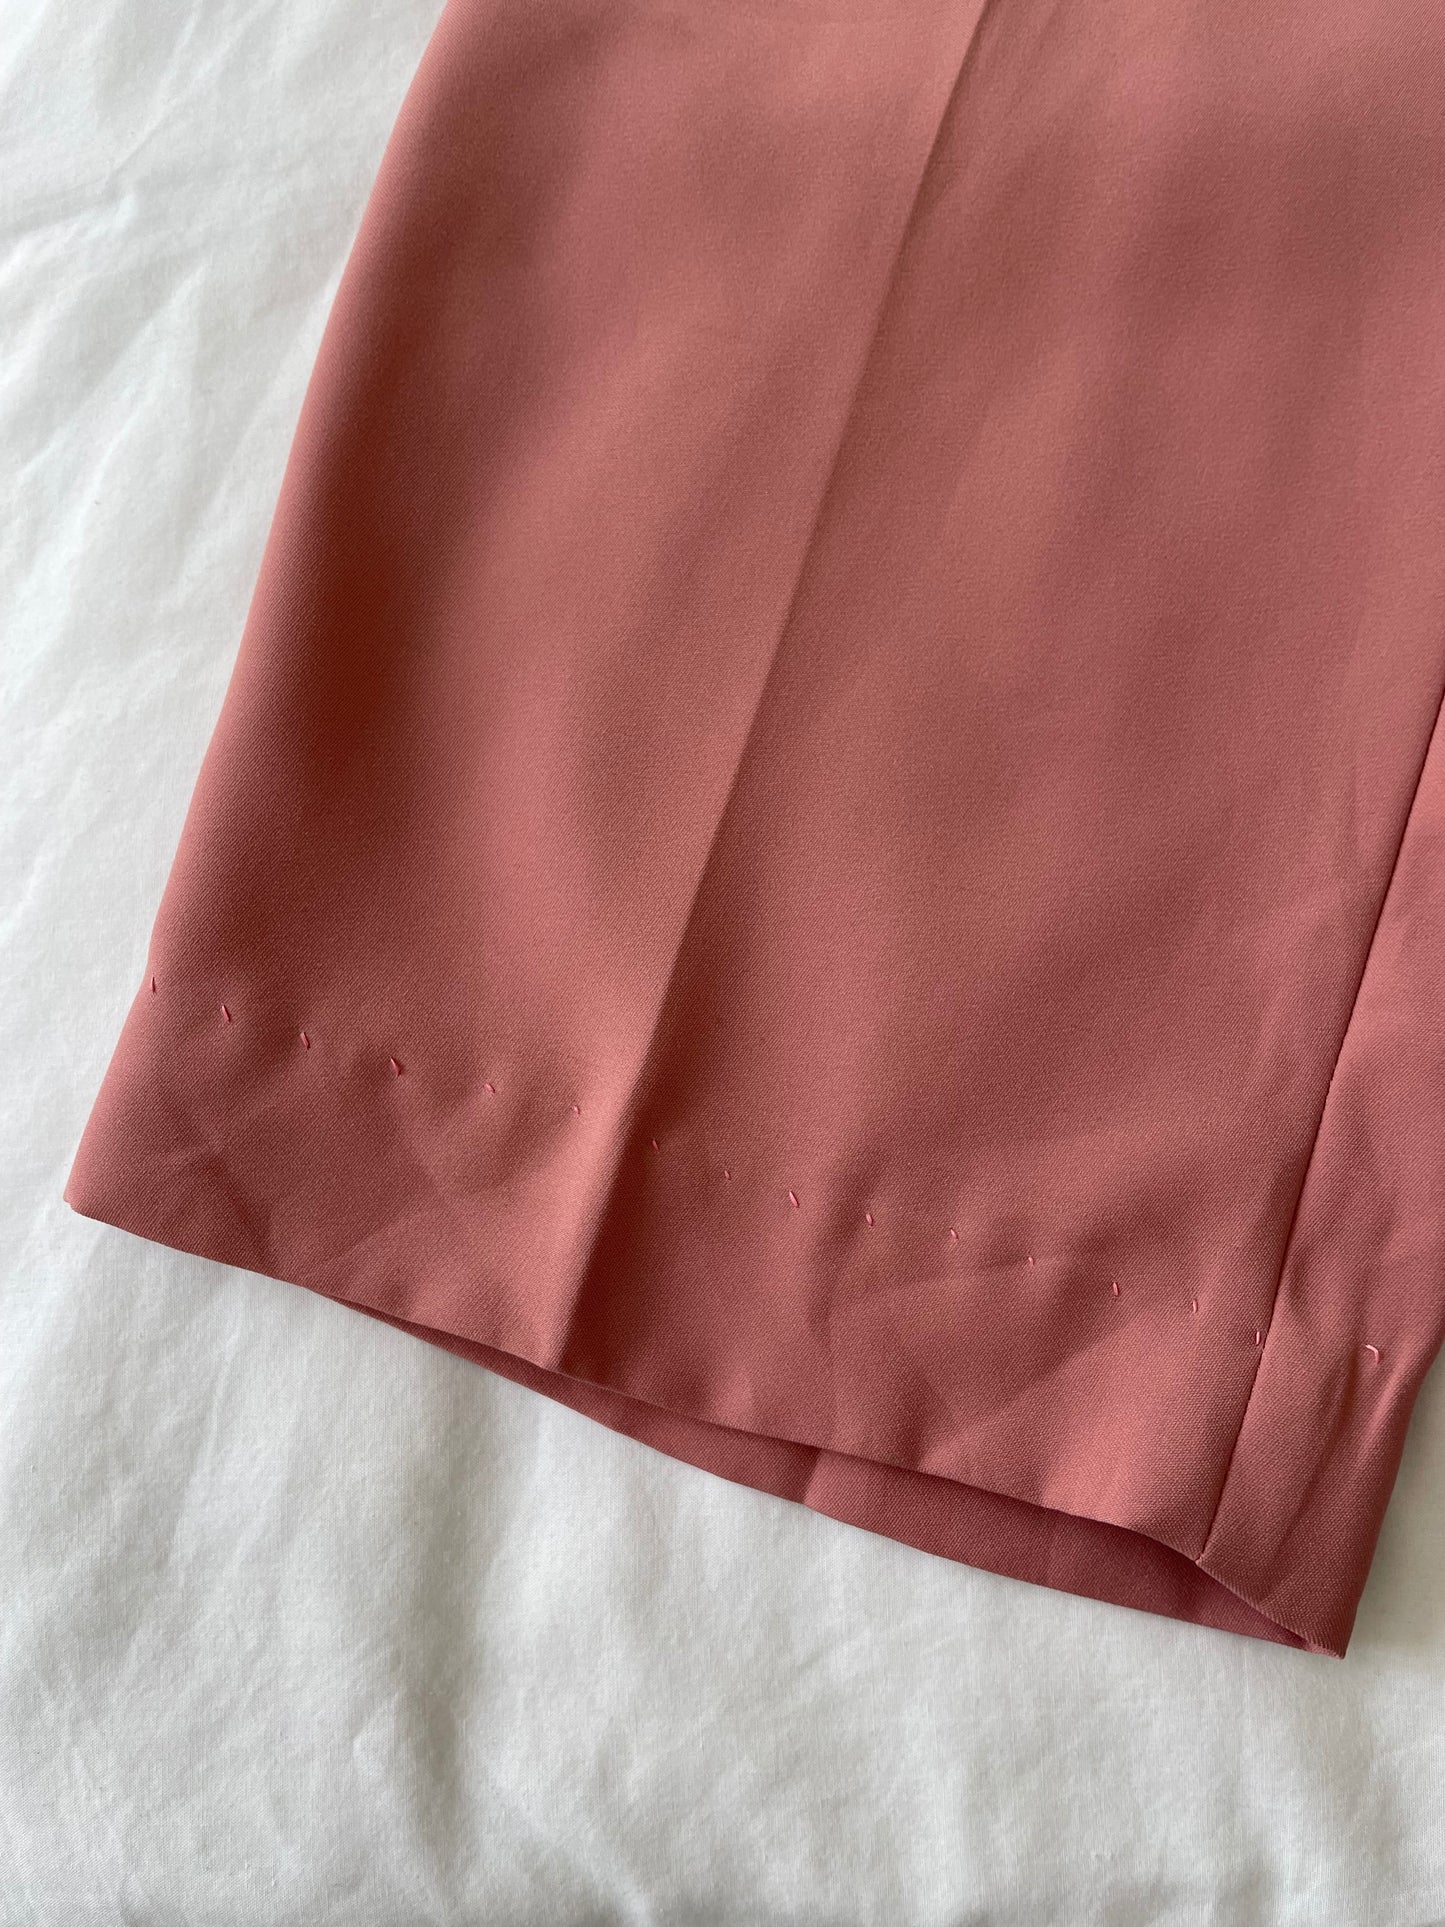 Pink Trousers - Size 10